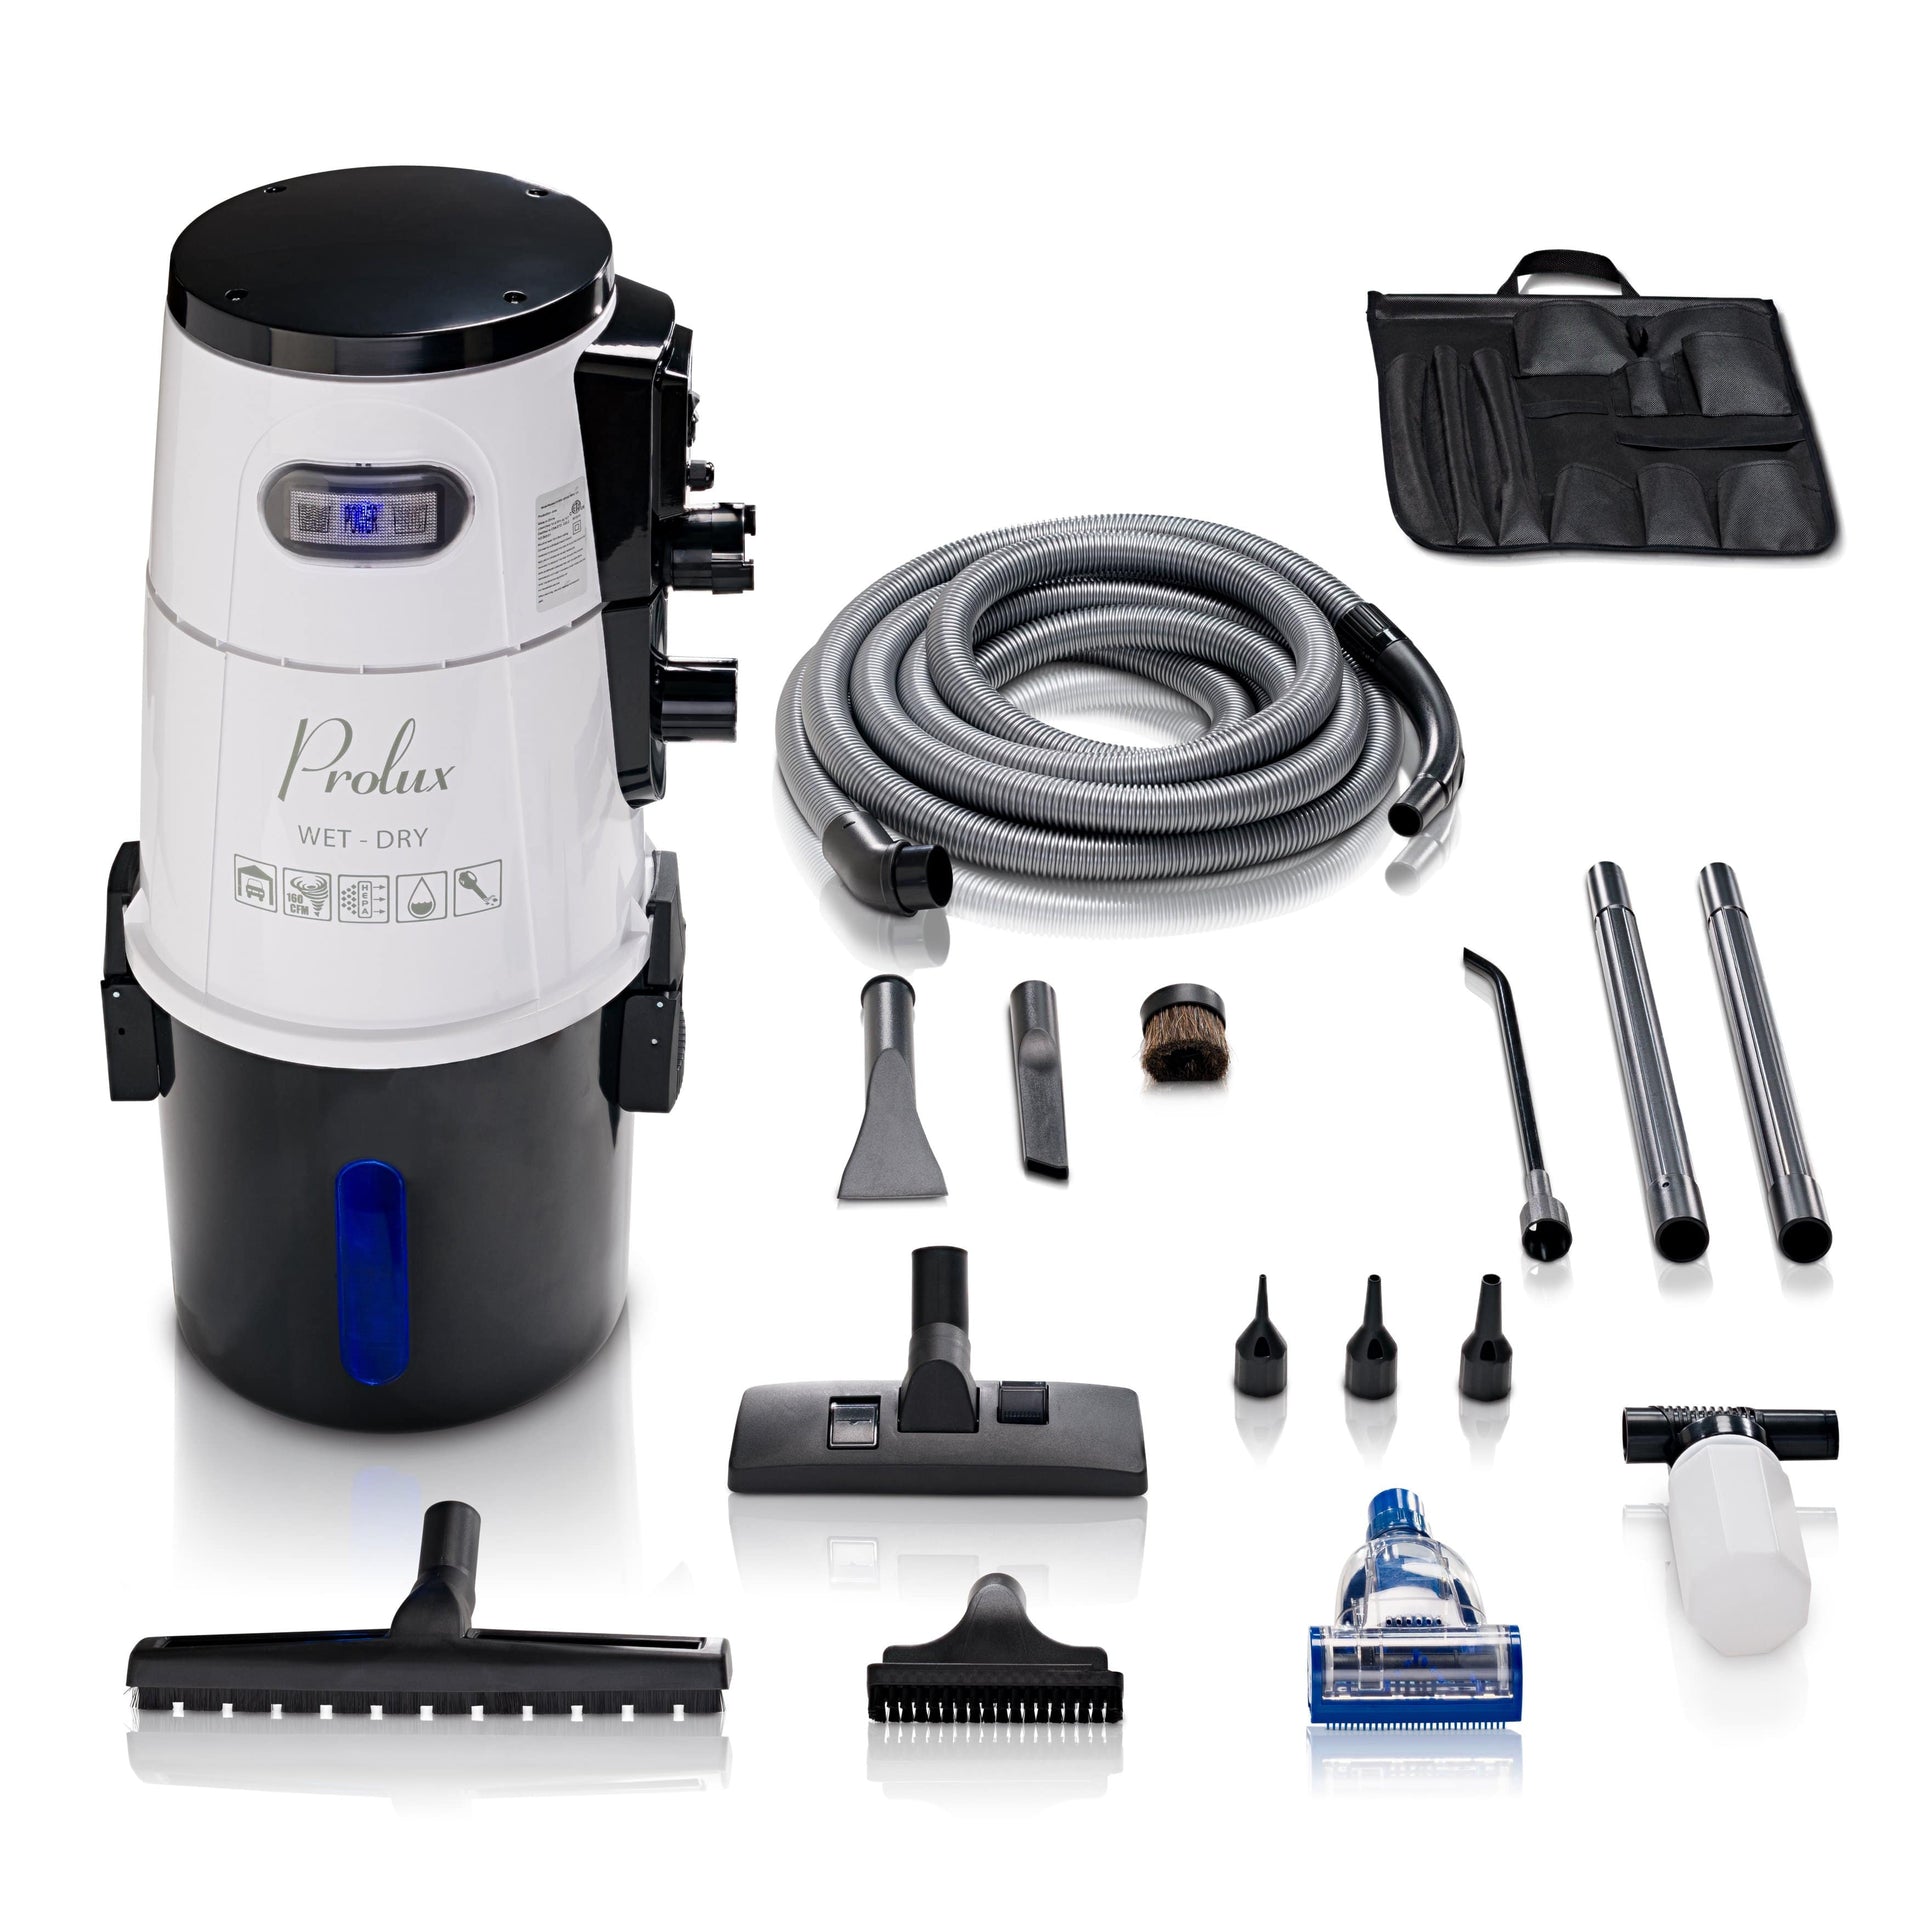 Wired Car Vacuum Cleaner-wet Dry Function, Multiple Accessories